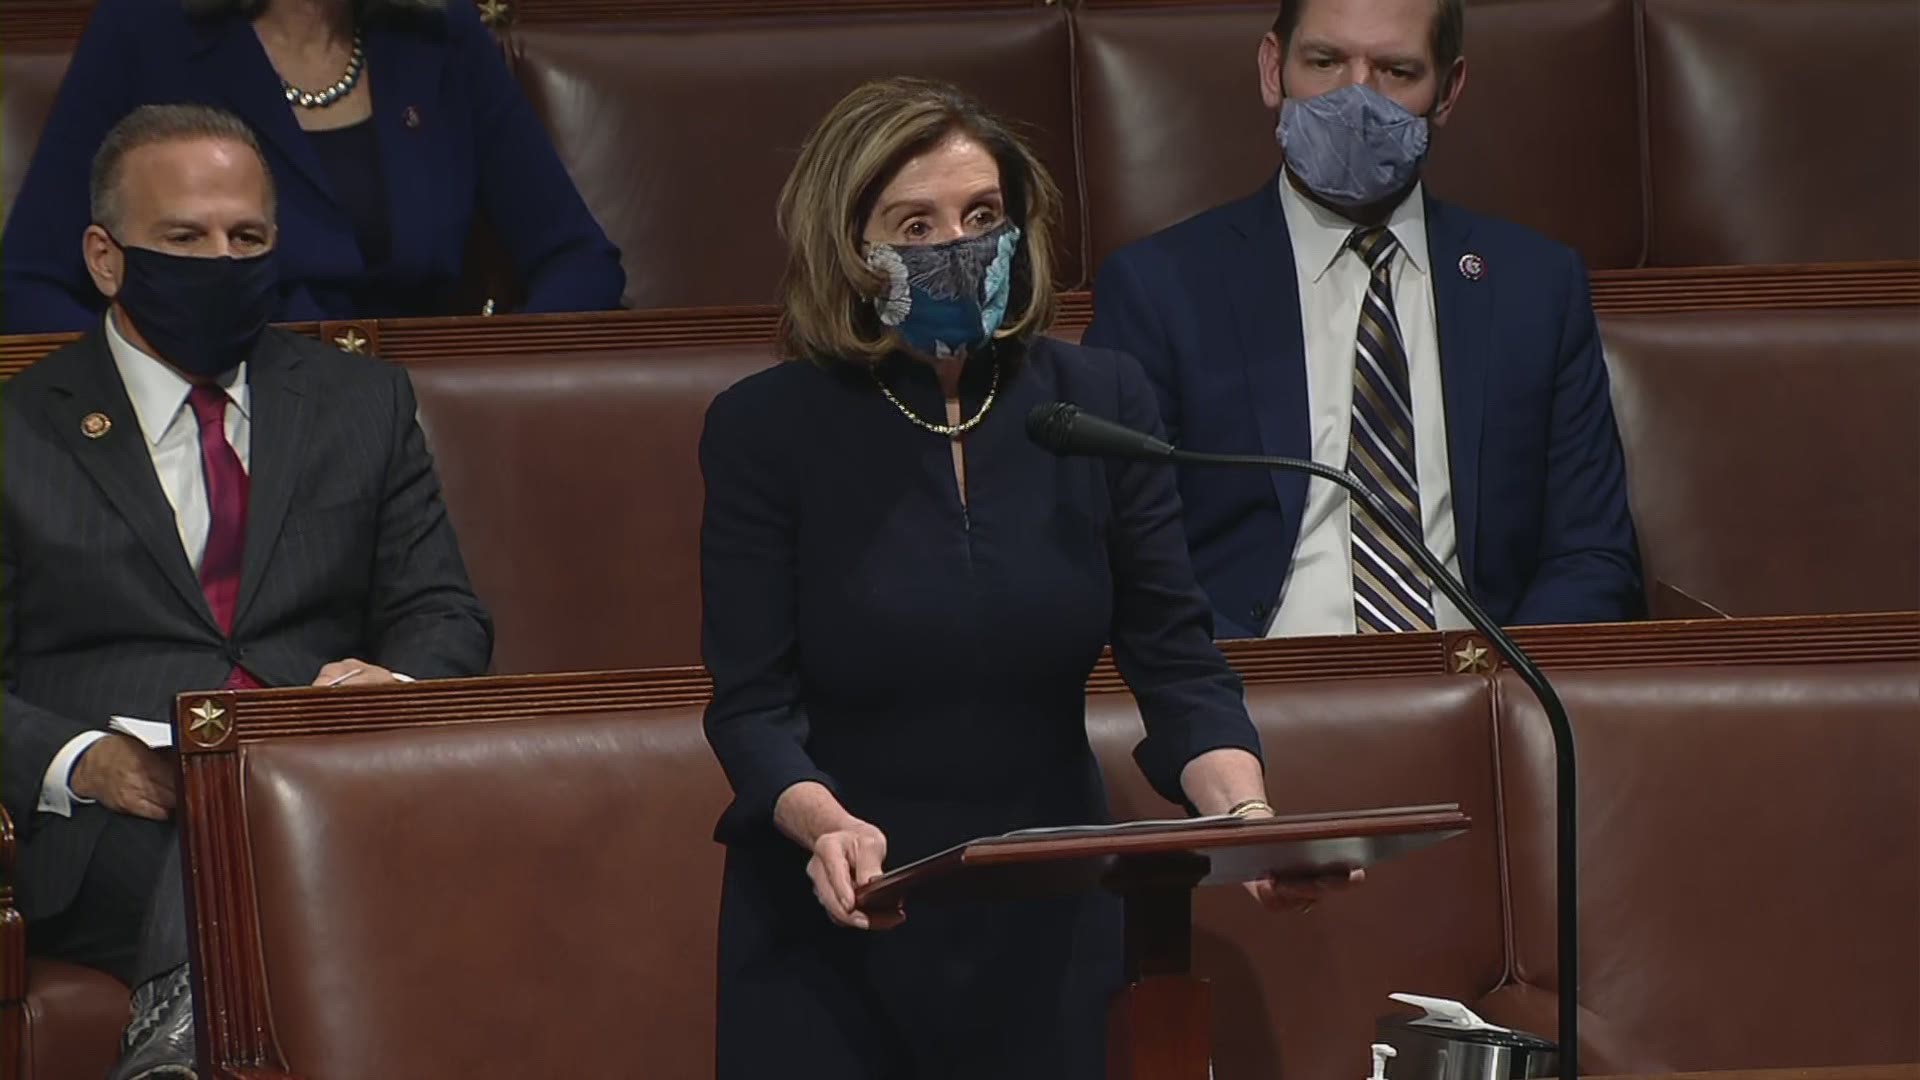 Speaker Nancy Pelosi made remarks as the U.S. House starts to debate President Donald Trump's second impeachment.